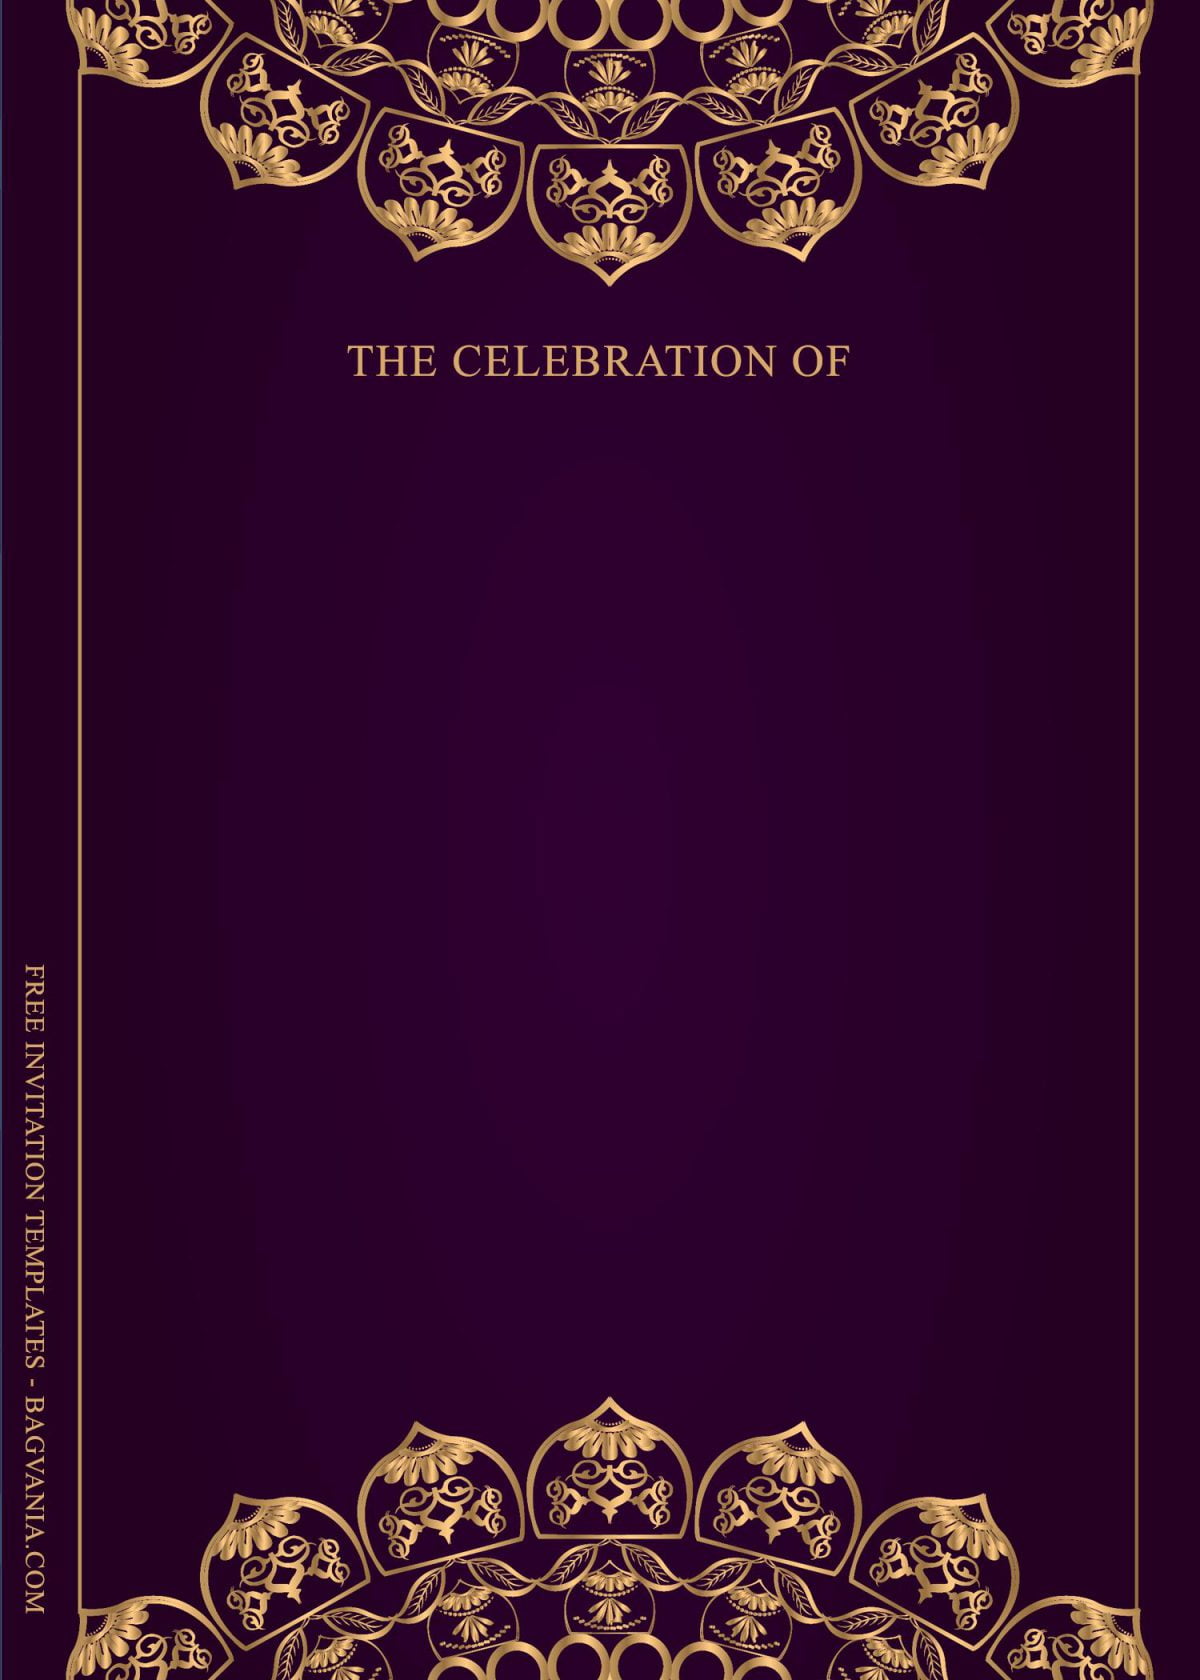 11+ Luxury Gold Birthday Invitation Templates and has stunning gold frame